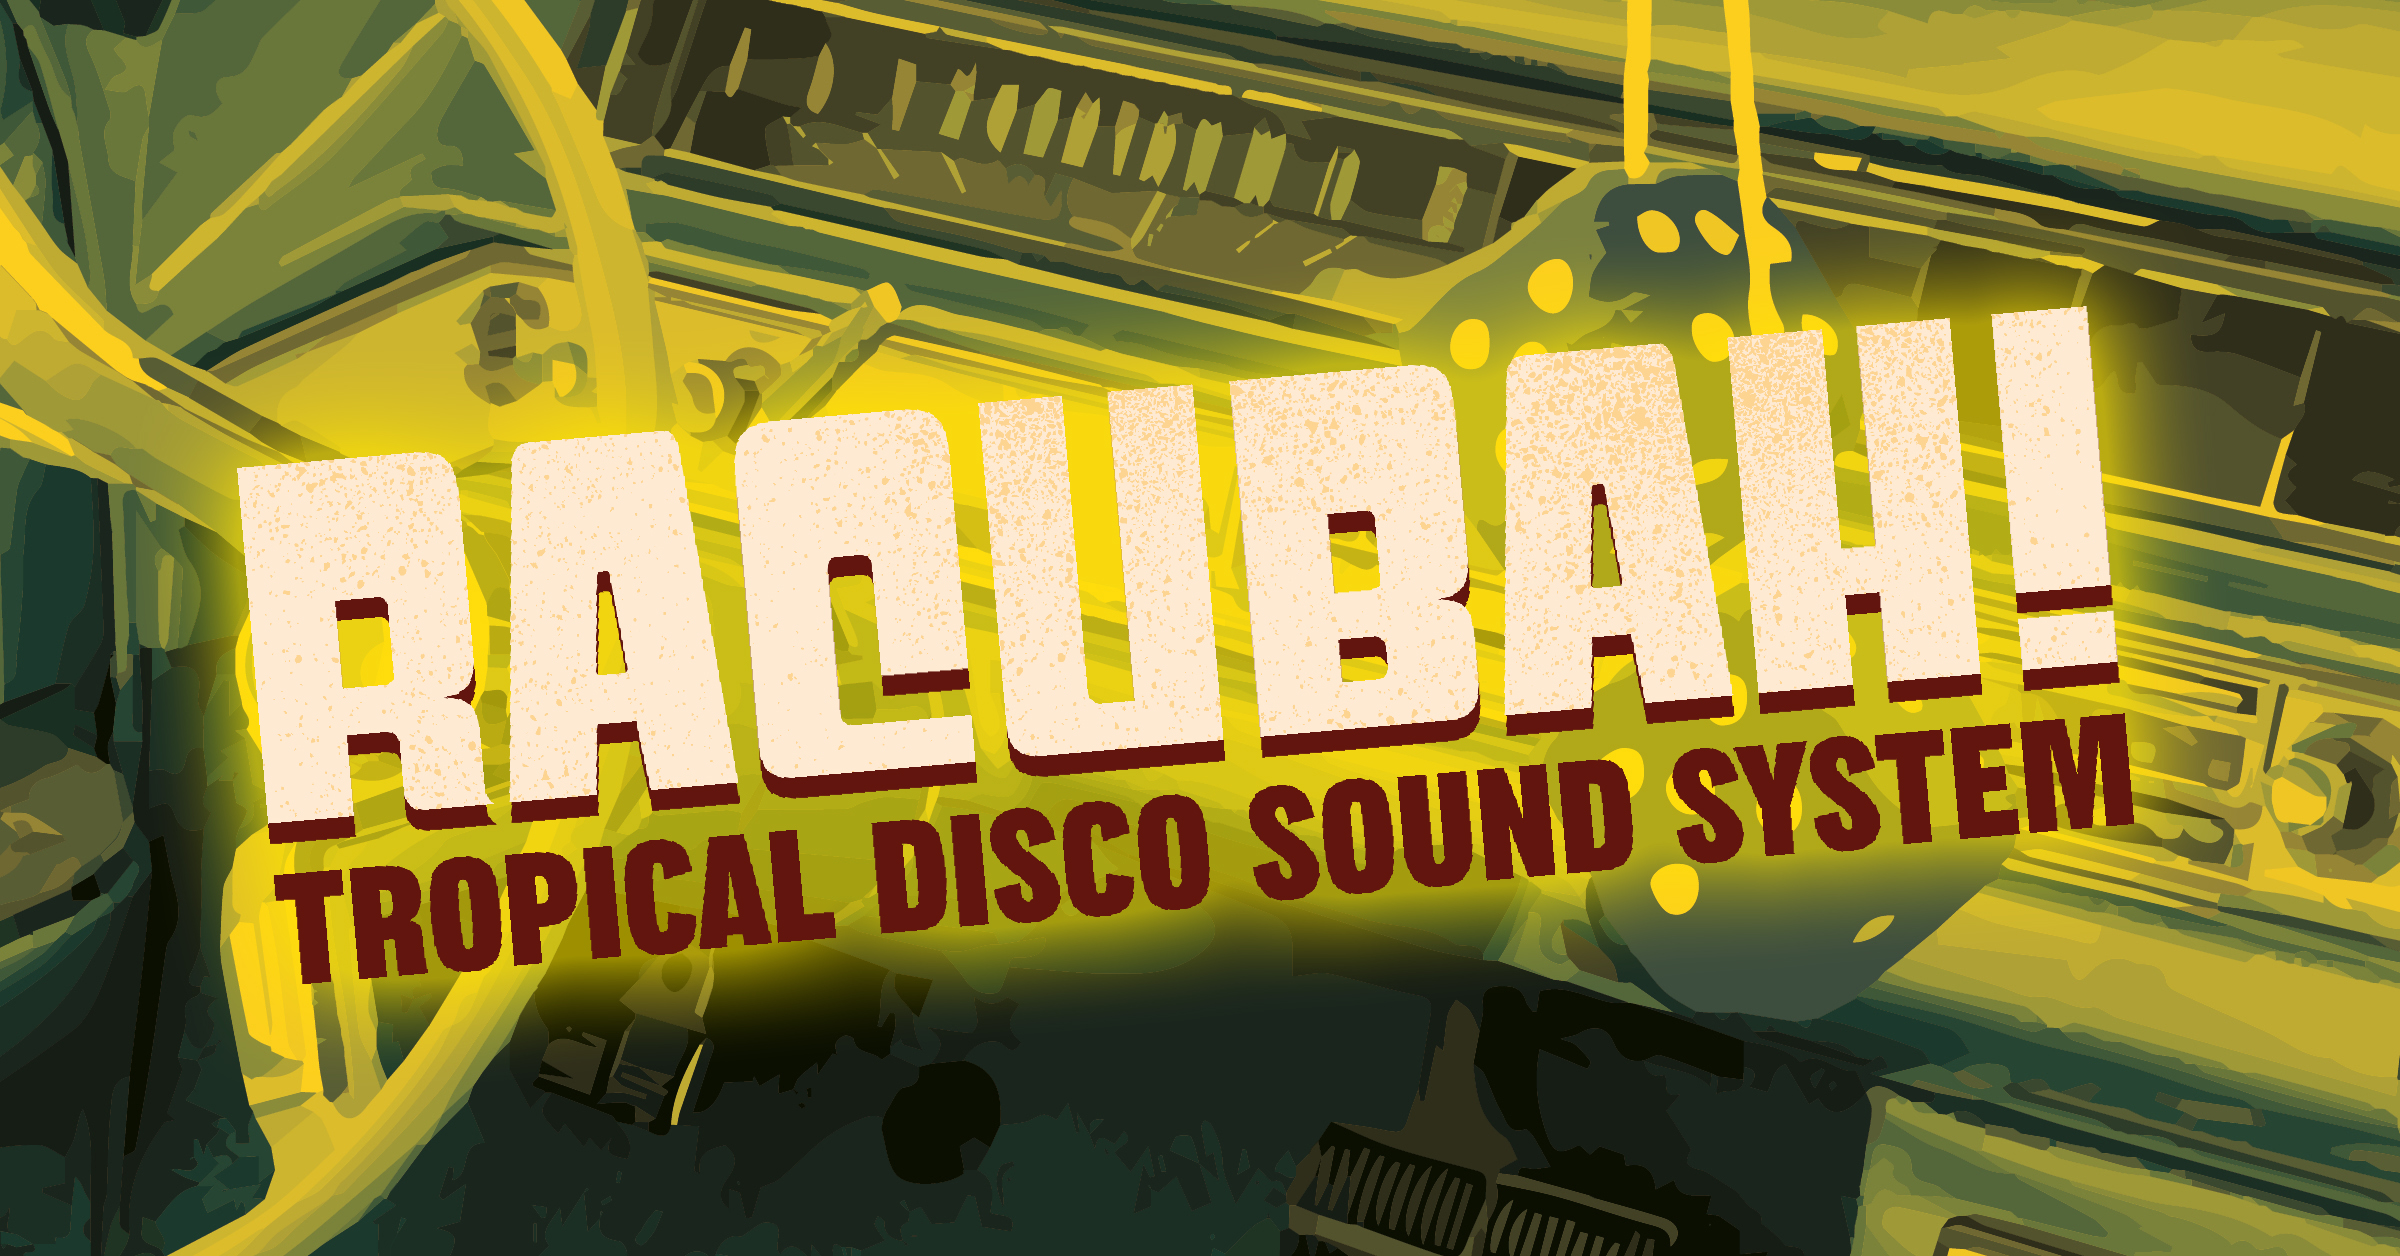 Racubah Tropical Disco Sound System Graphic